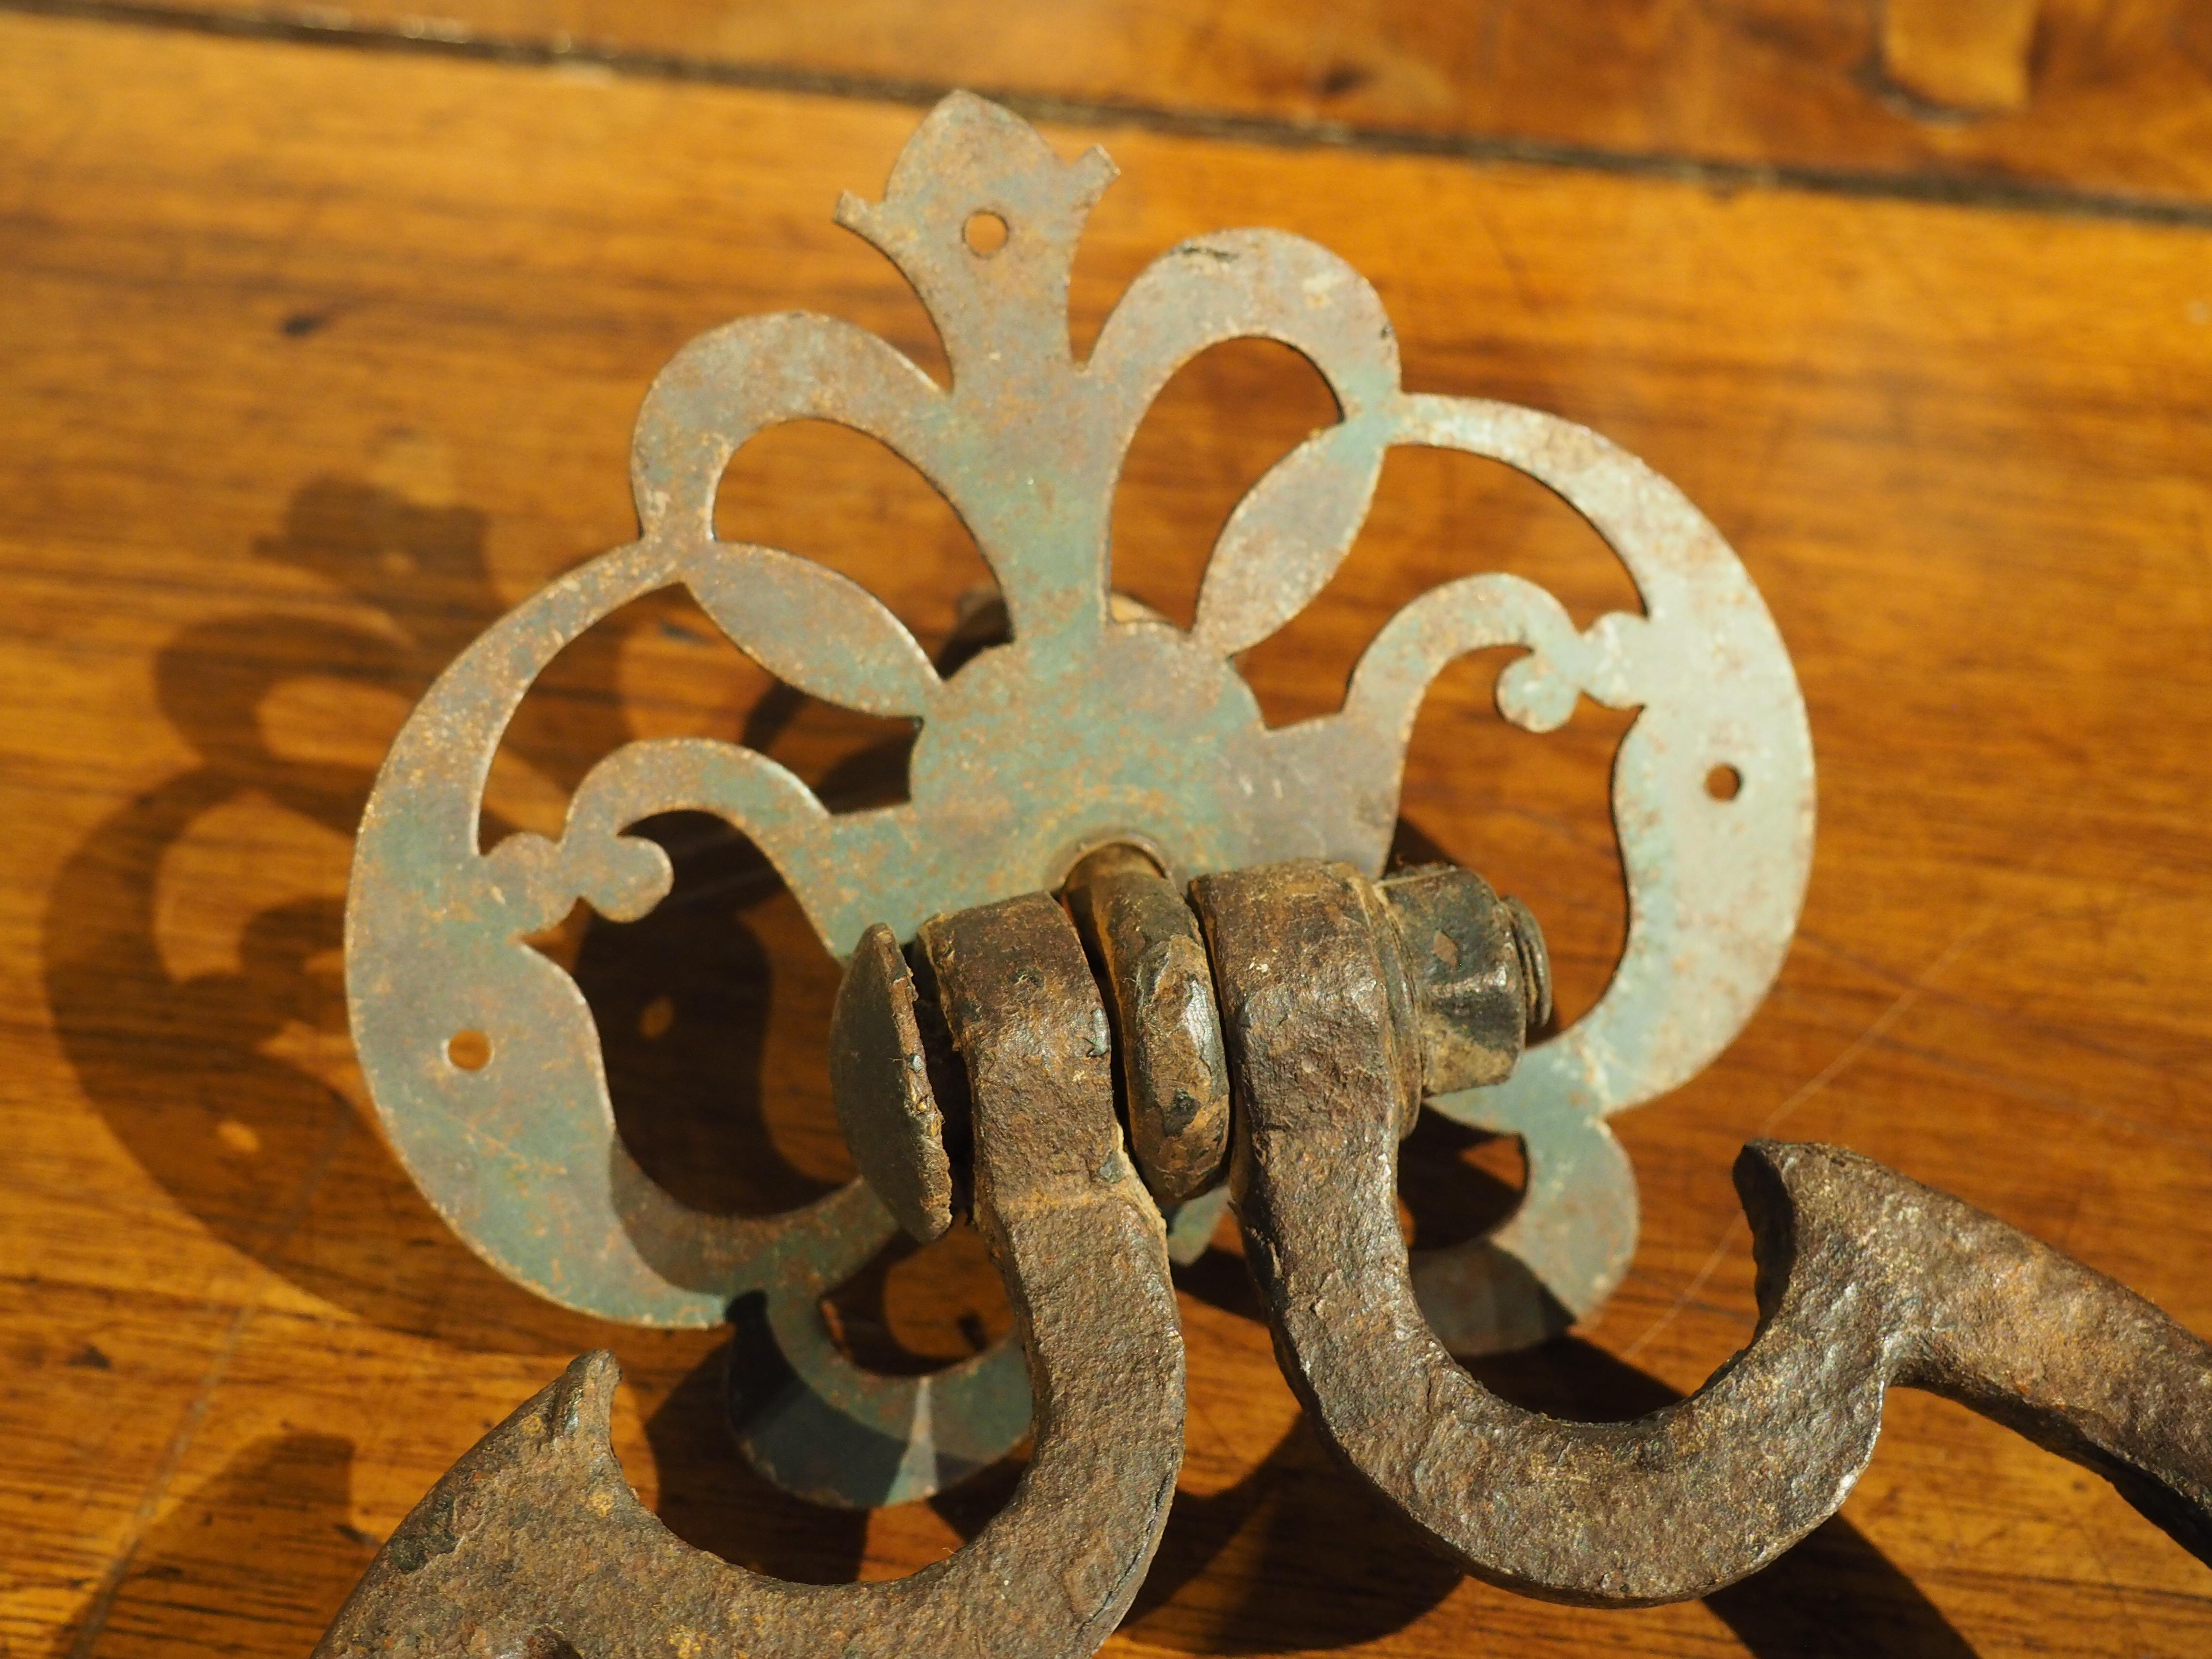 Antique Wrought Iron Door Knocker from France, 18th Century 4